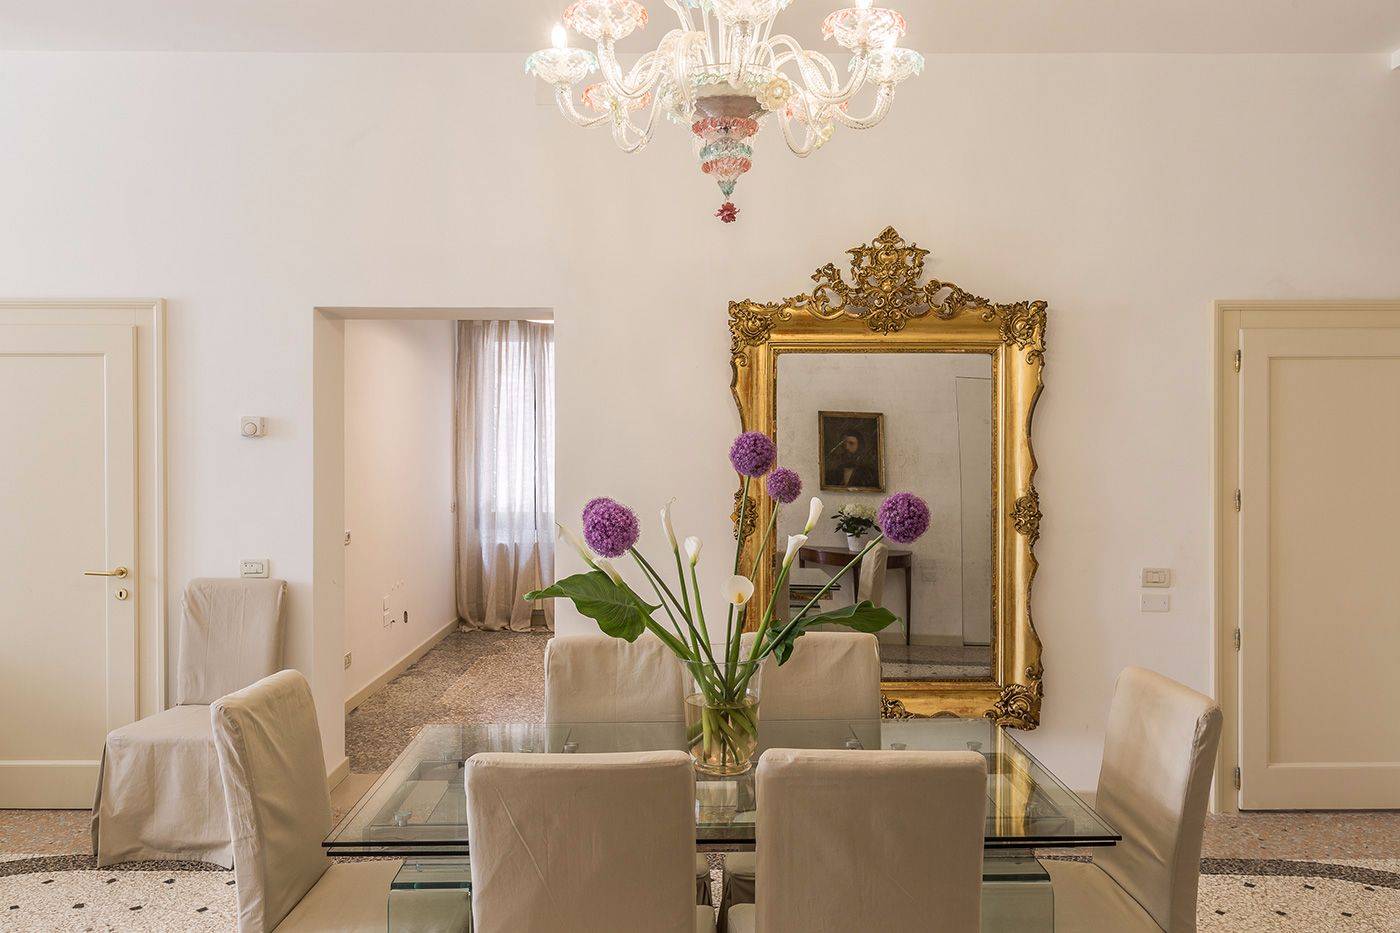 Exclusive rental of Tosca apartment in Sestiere San Marco Venice Italy